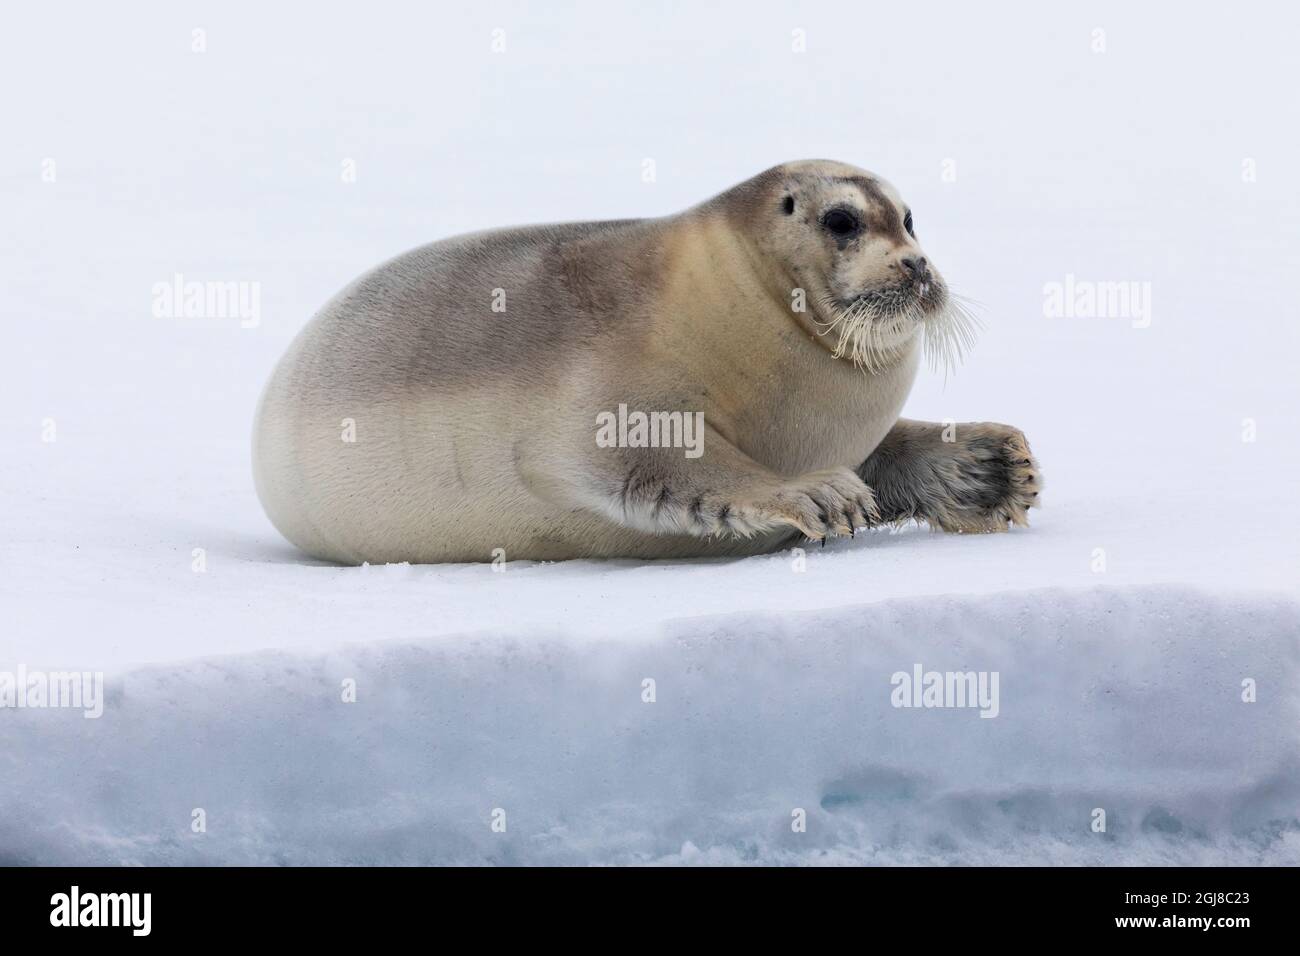 North of Svalbard, the pack ice. A portrait of a young bearded seal hauled out on the pack ice. Stock Photo